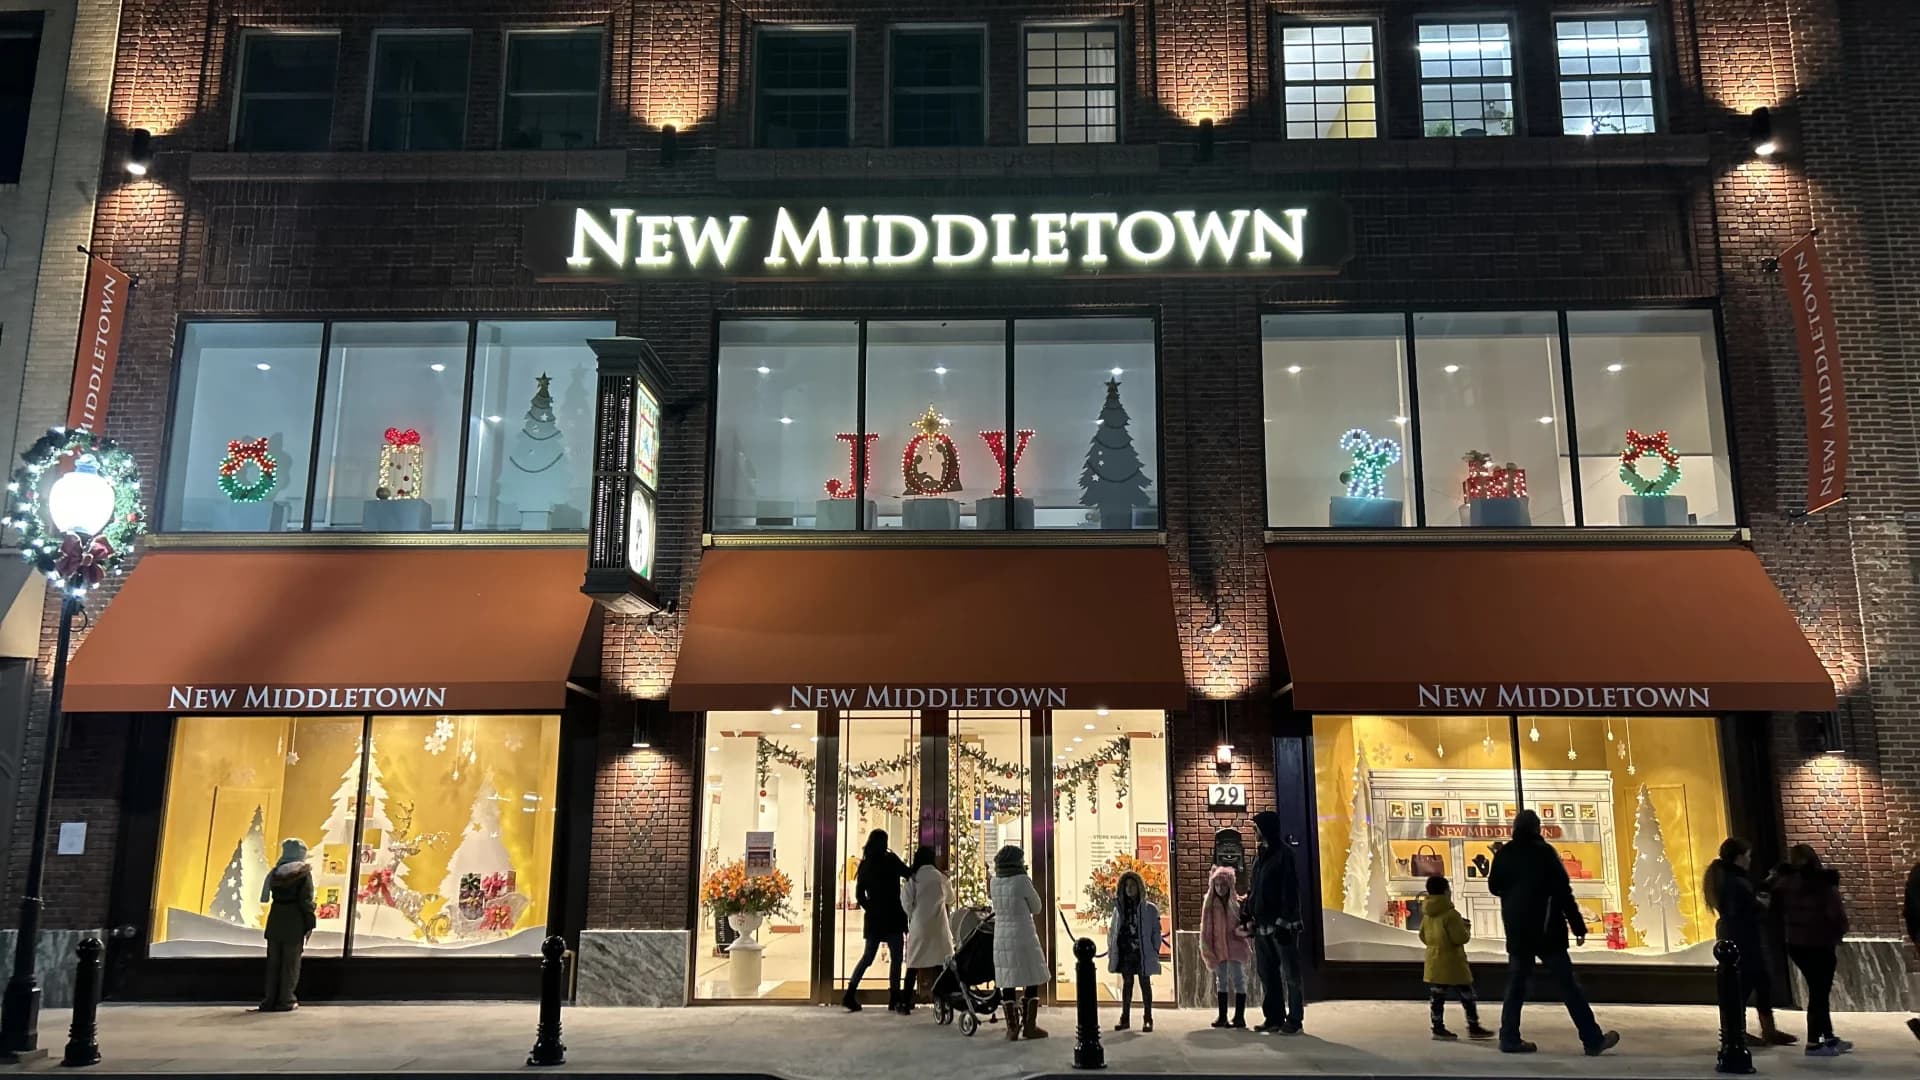 Christmas tradition resumes at reopened Middletown department store